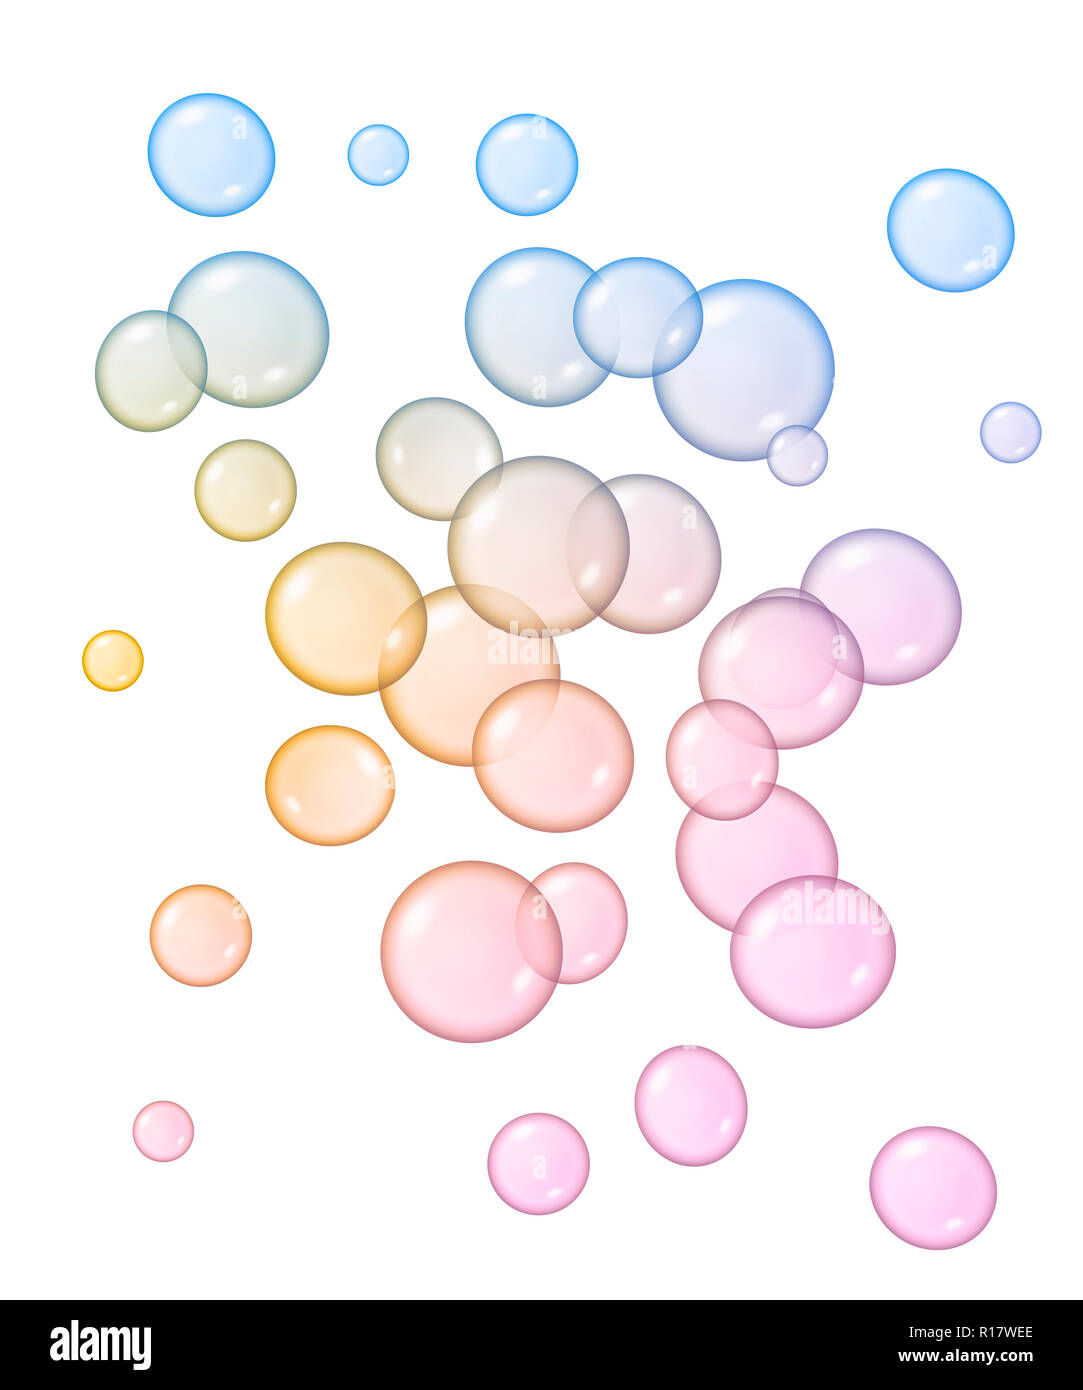 Digital image of blue, pink and yellow bubbles of different sizes floating, white background Stock Photo